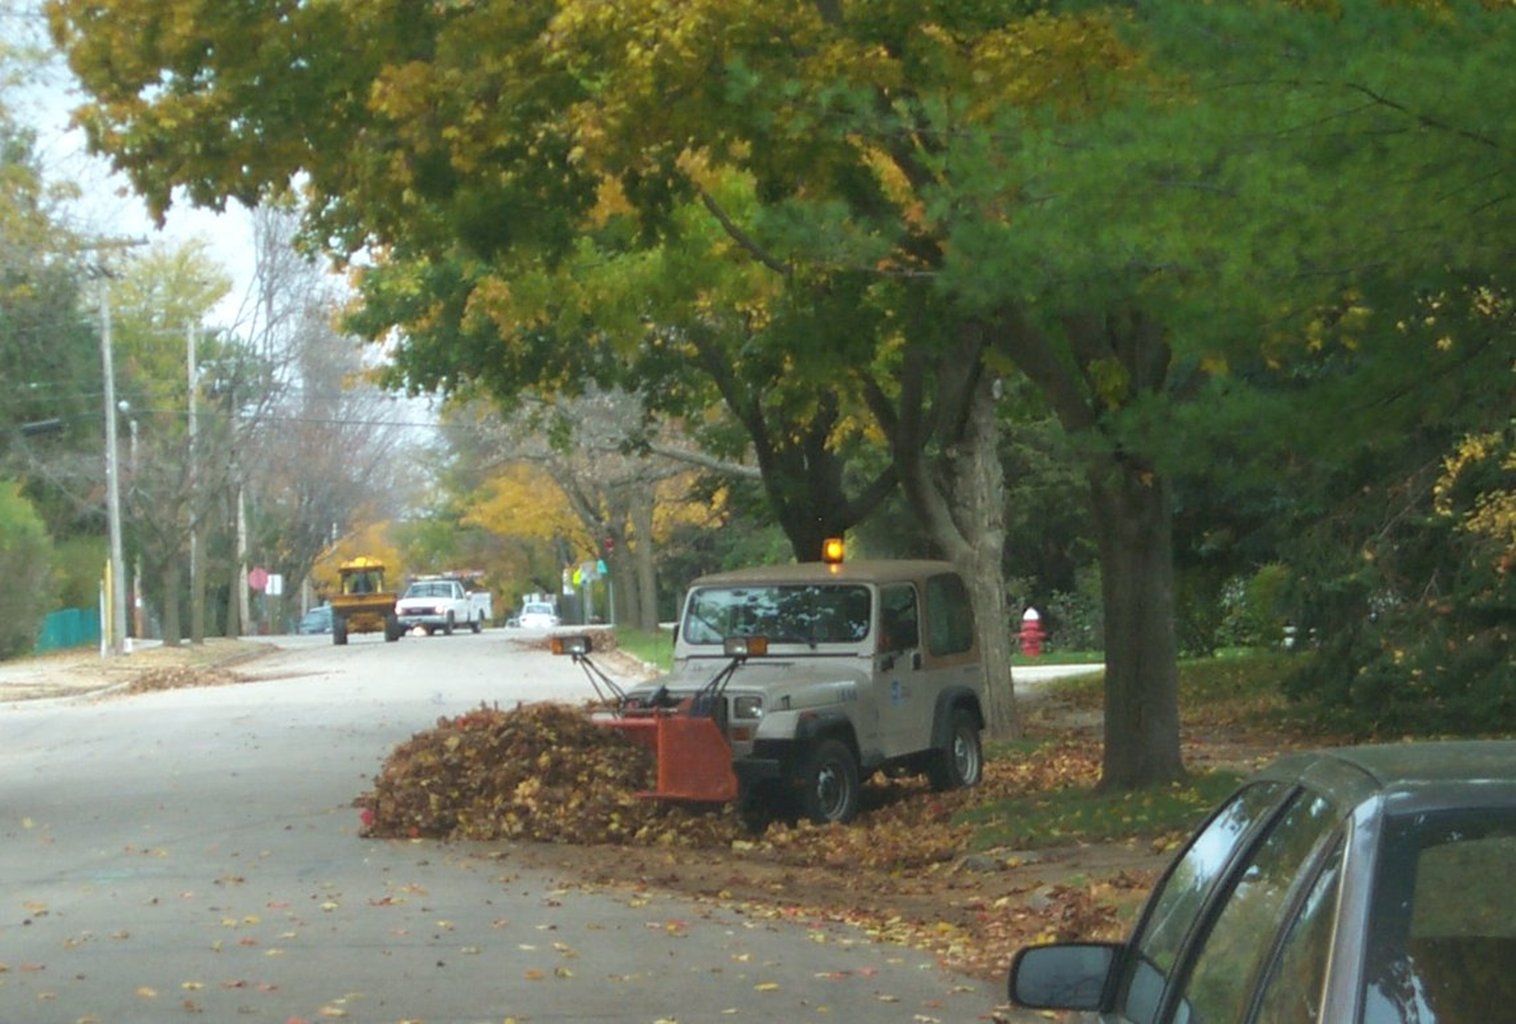 Removing fallen leaves can improve urban water quality